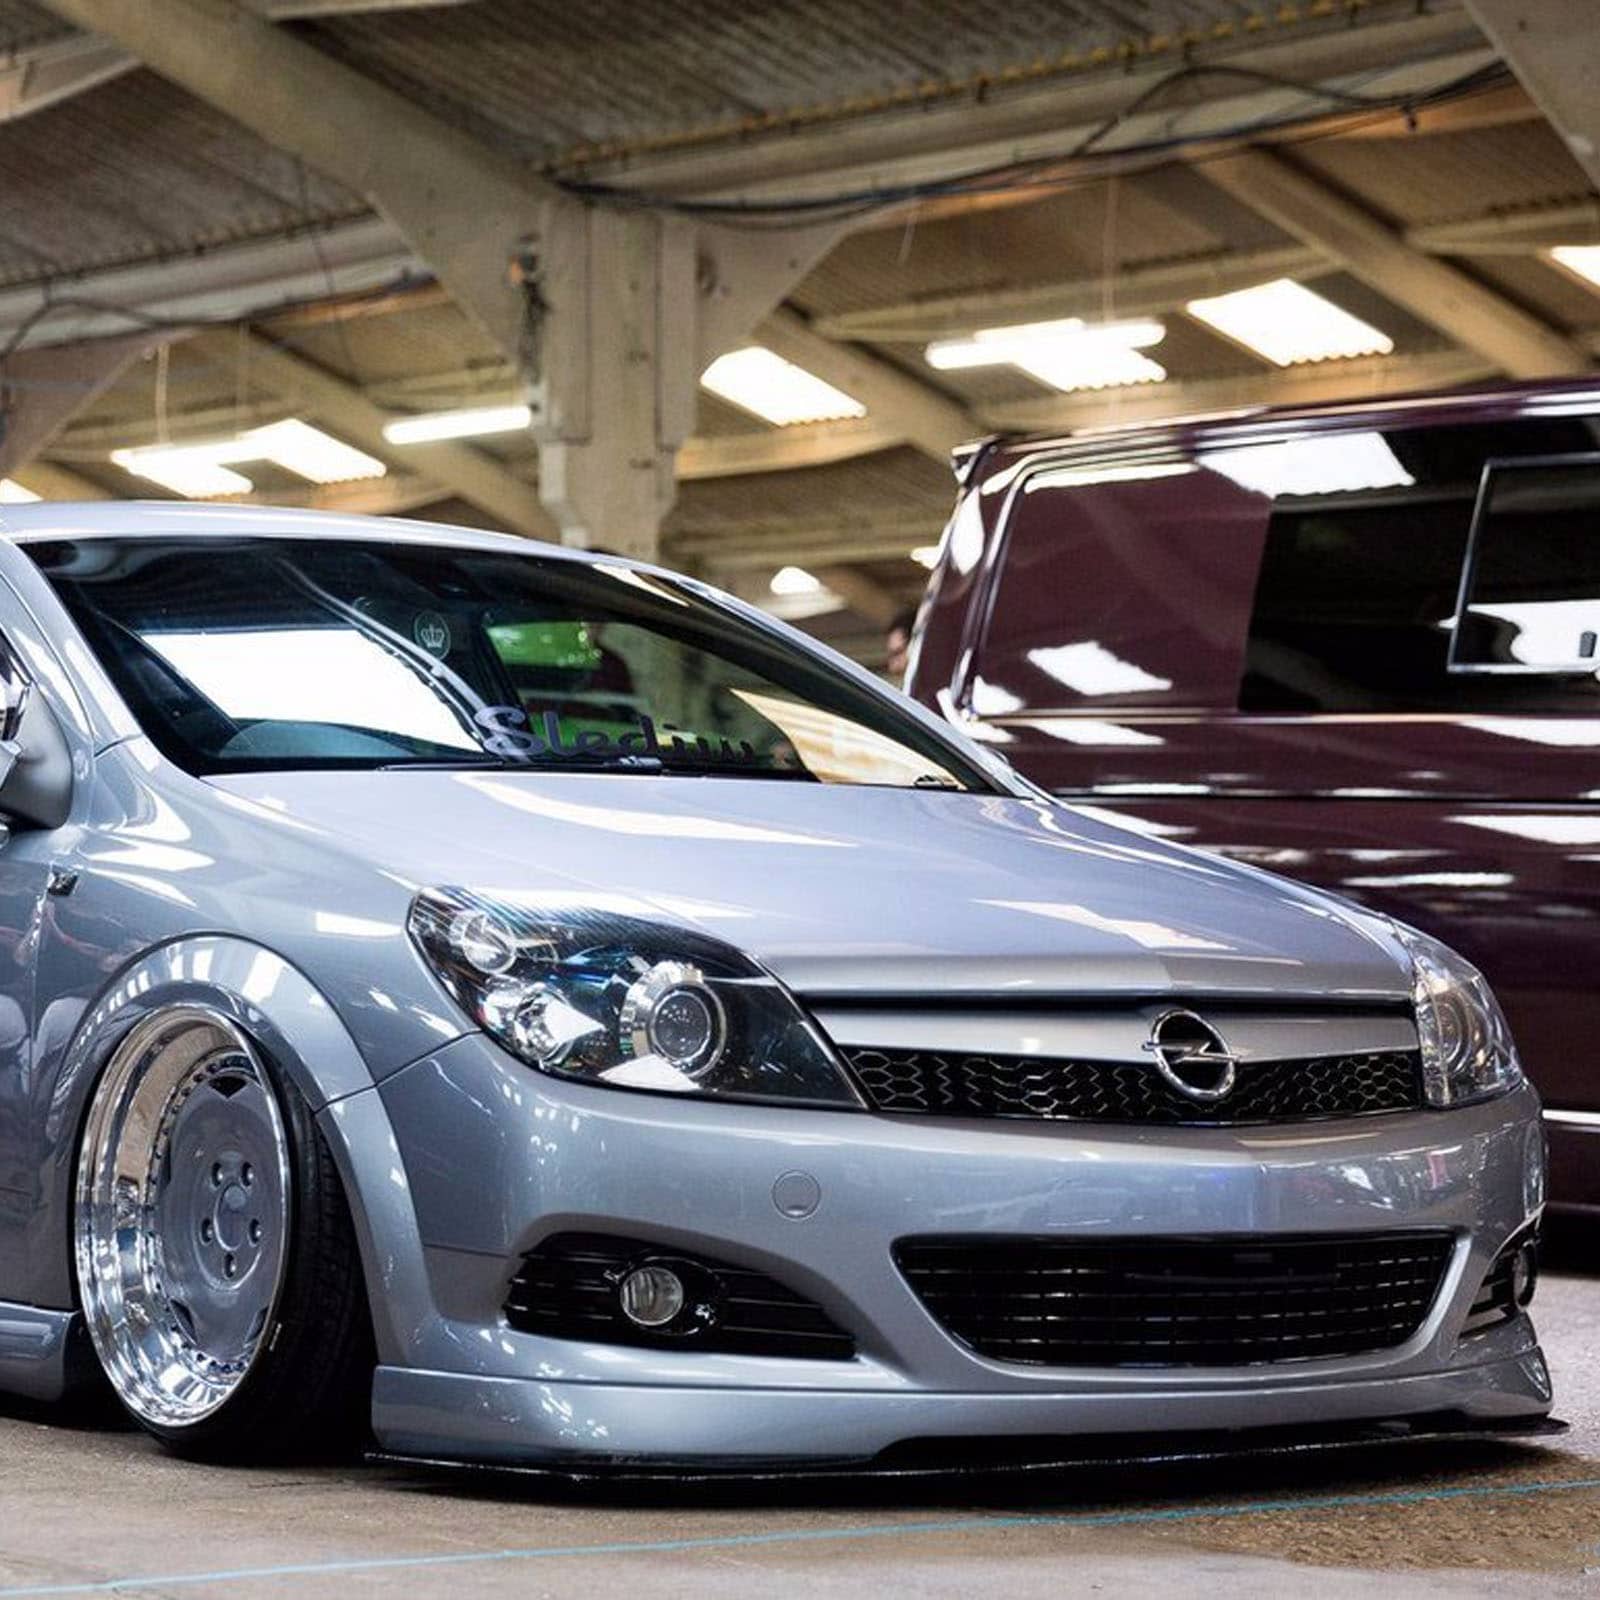 Www tuning. Opel Astra h stens. Opel Astra h stance. Opel Astra h стэнс.